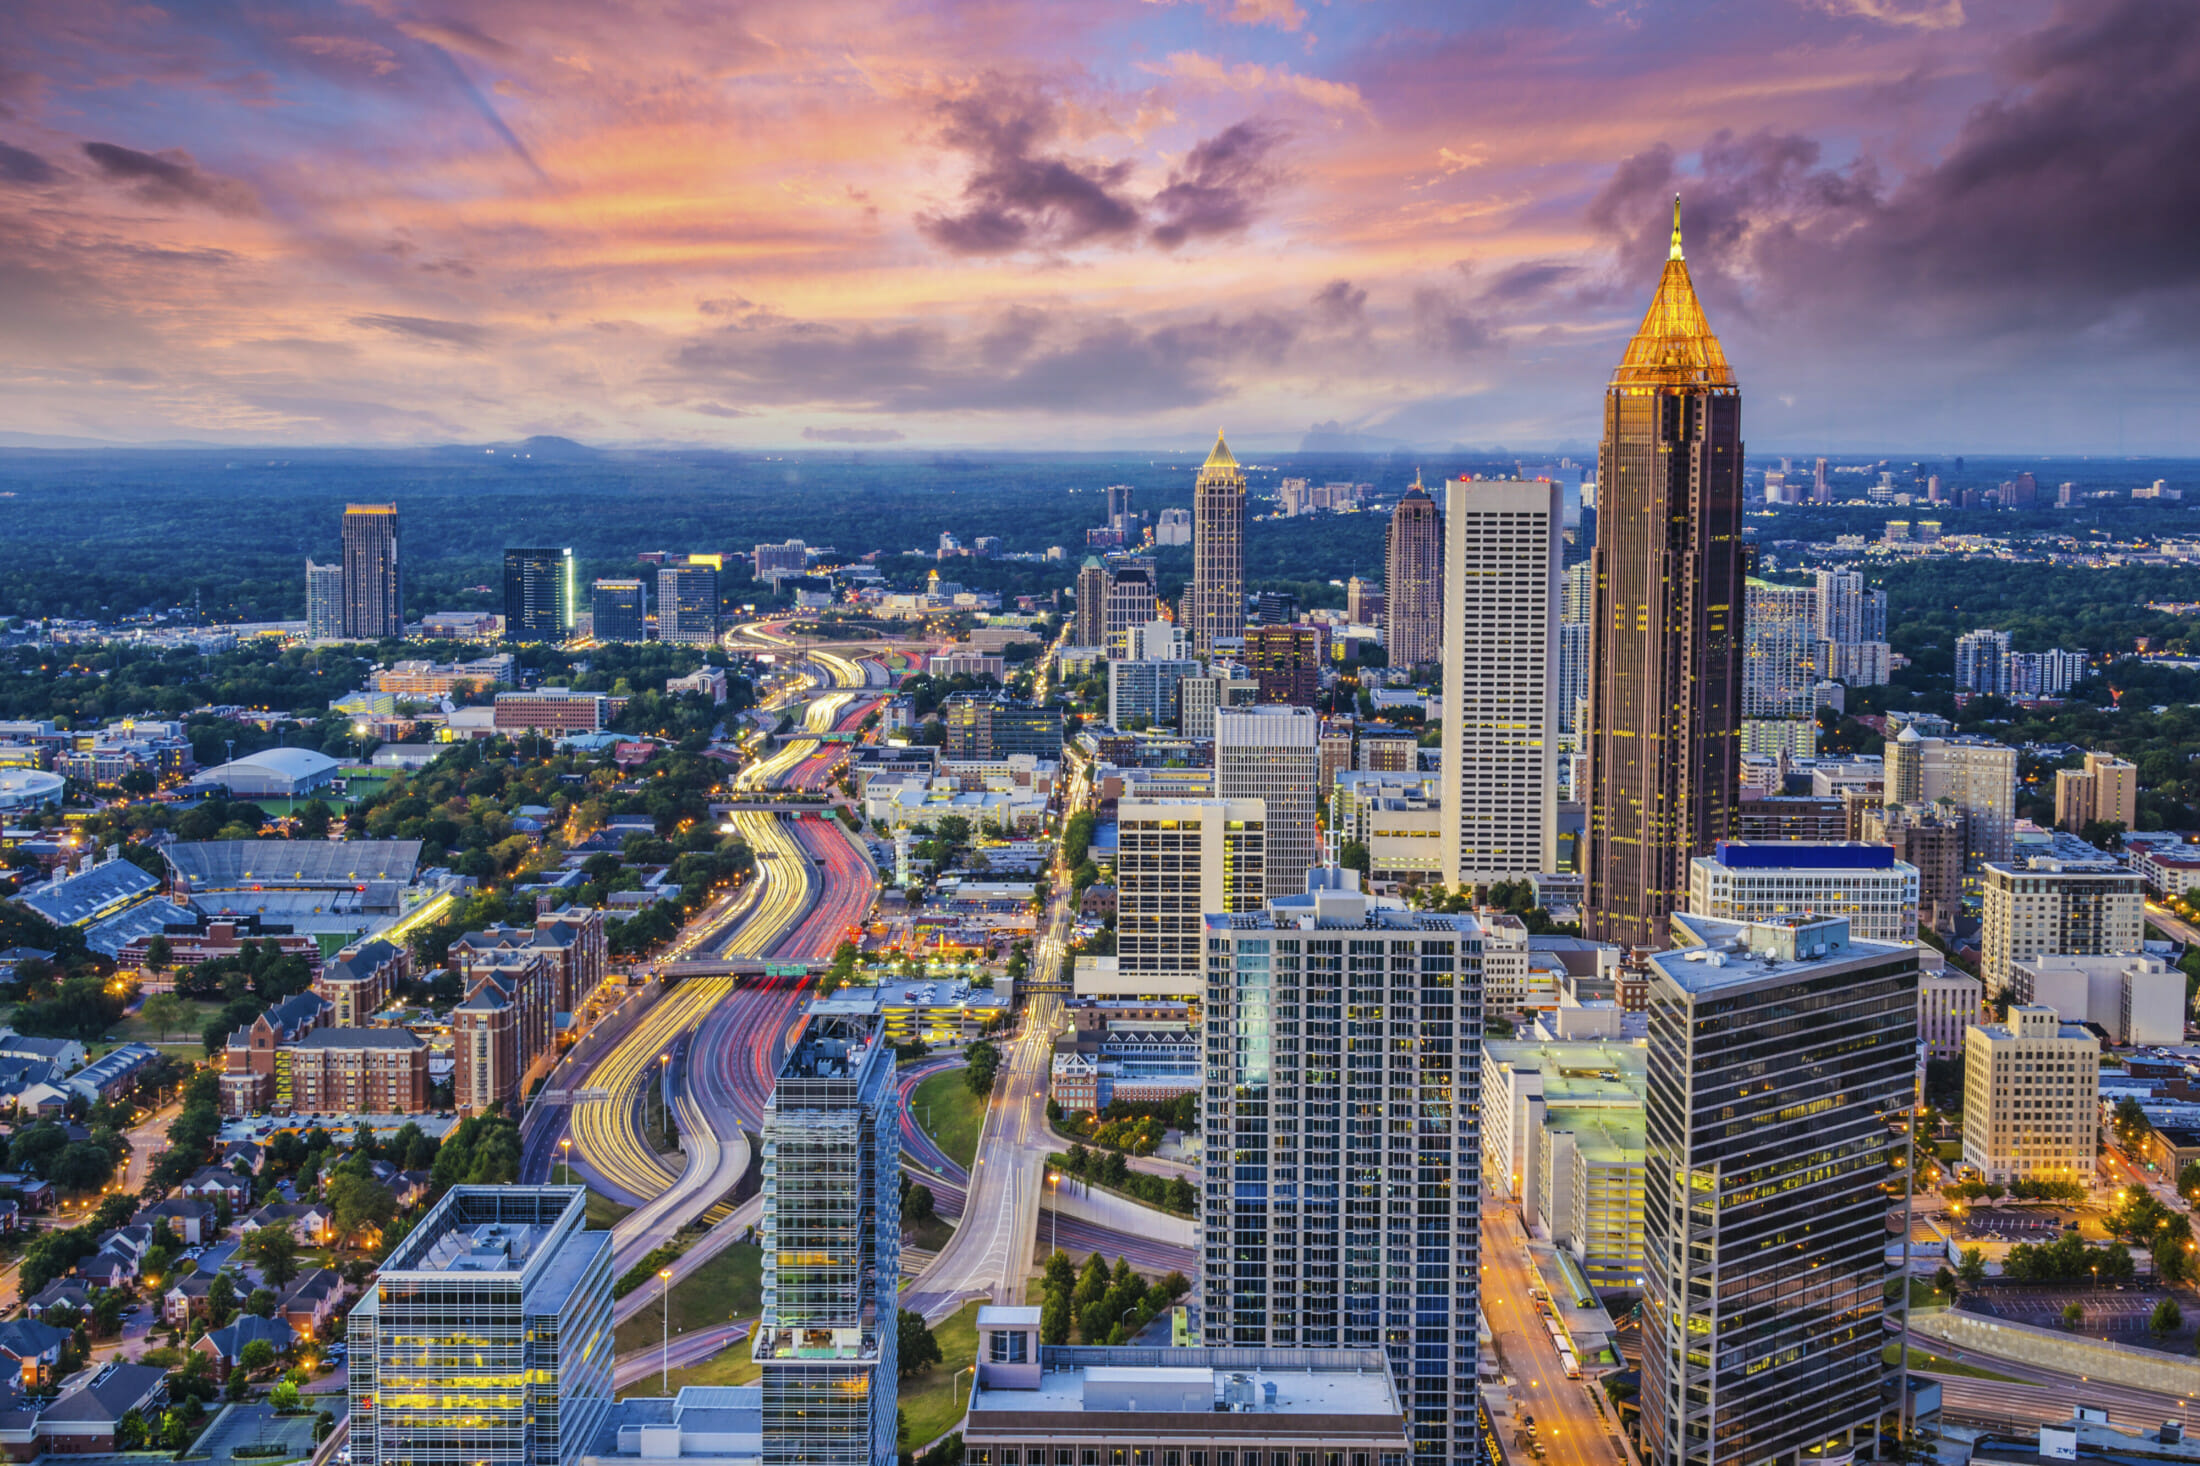 Atlanta, Georgia | 50 Up-and-Coming Real Estate Markets to Watch in 2019 | Buildium